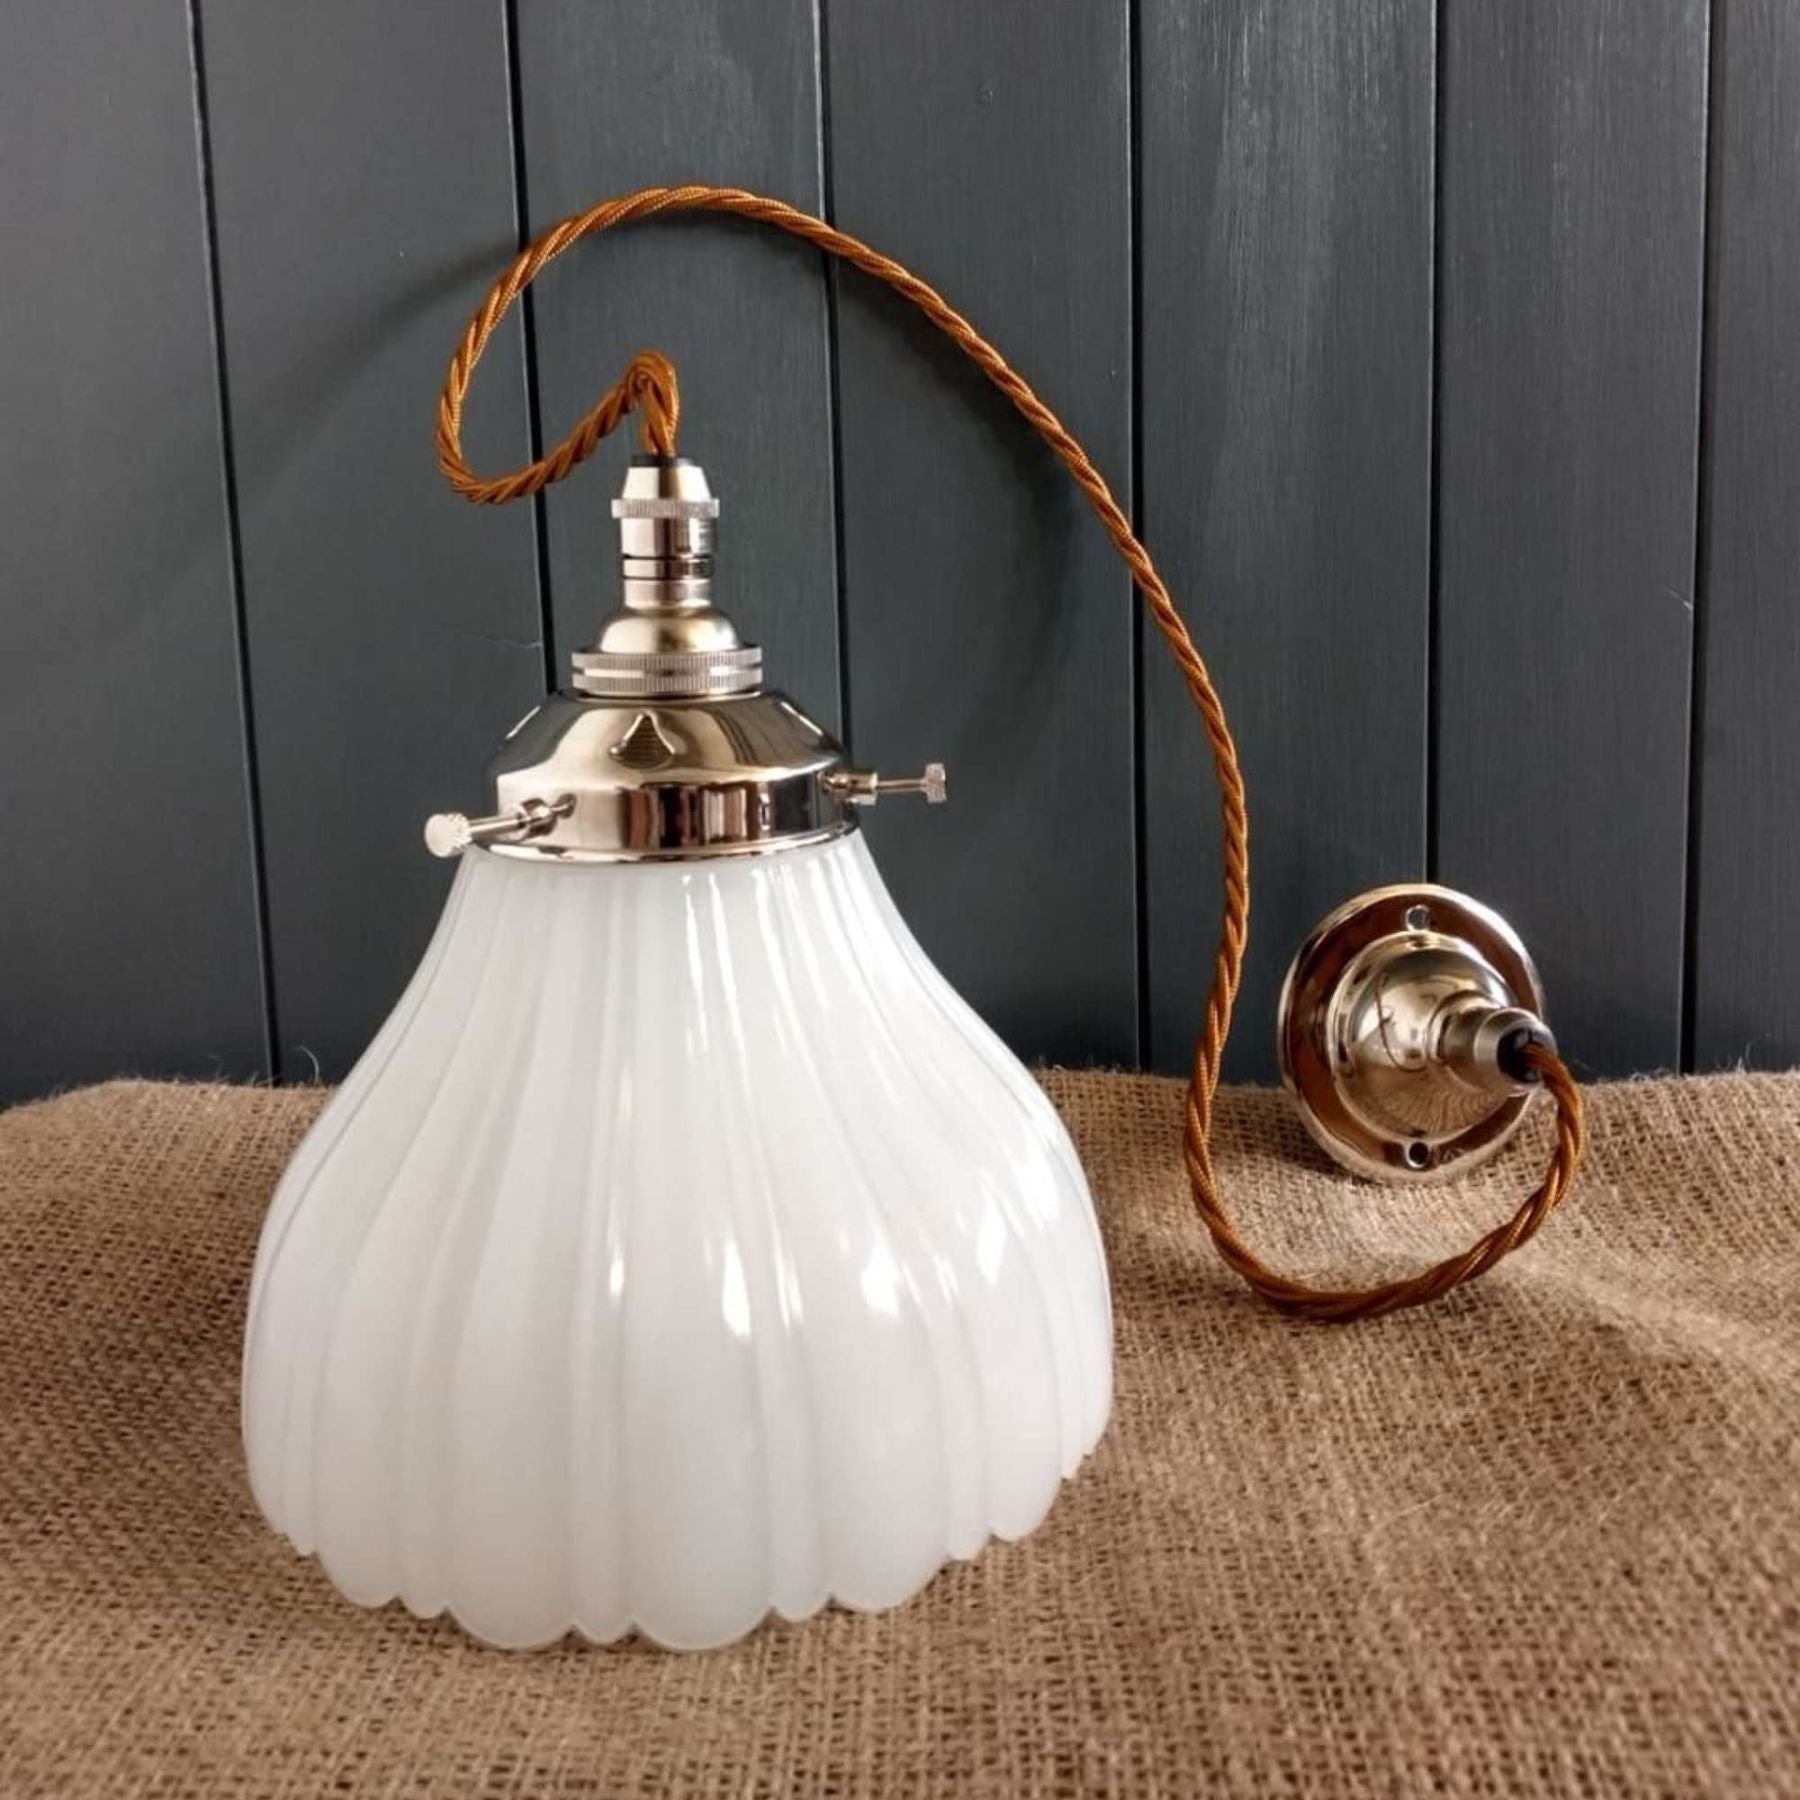 upgrade your space by replacing old lights with new ones